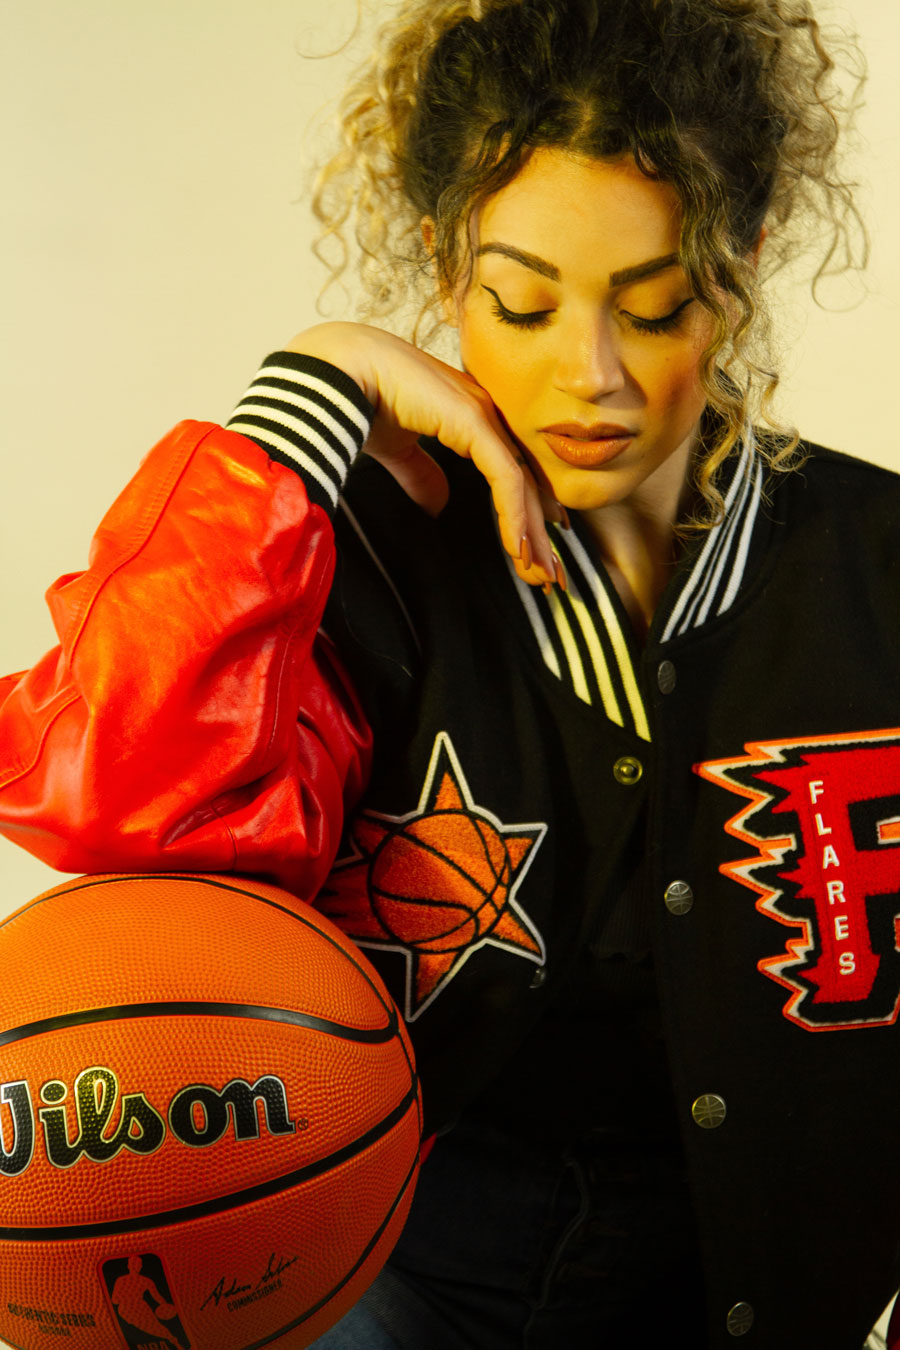 red mvp varsity jacket in the colors of the playoffs flares team unsold for girls, urban look fangear er woman